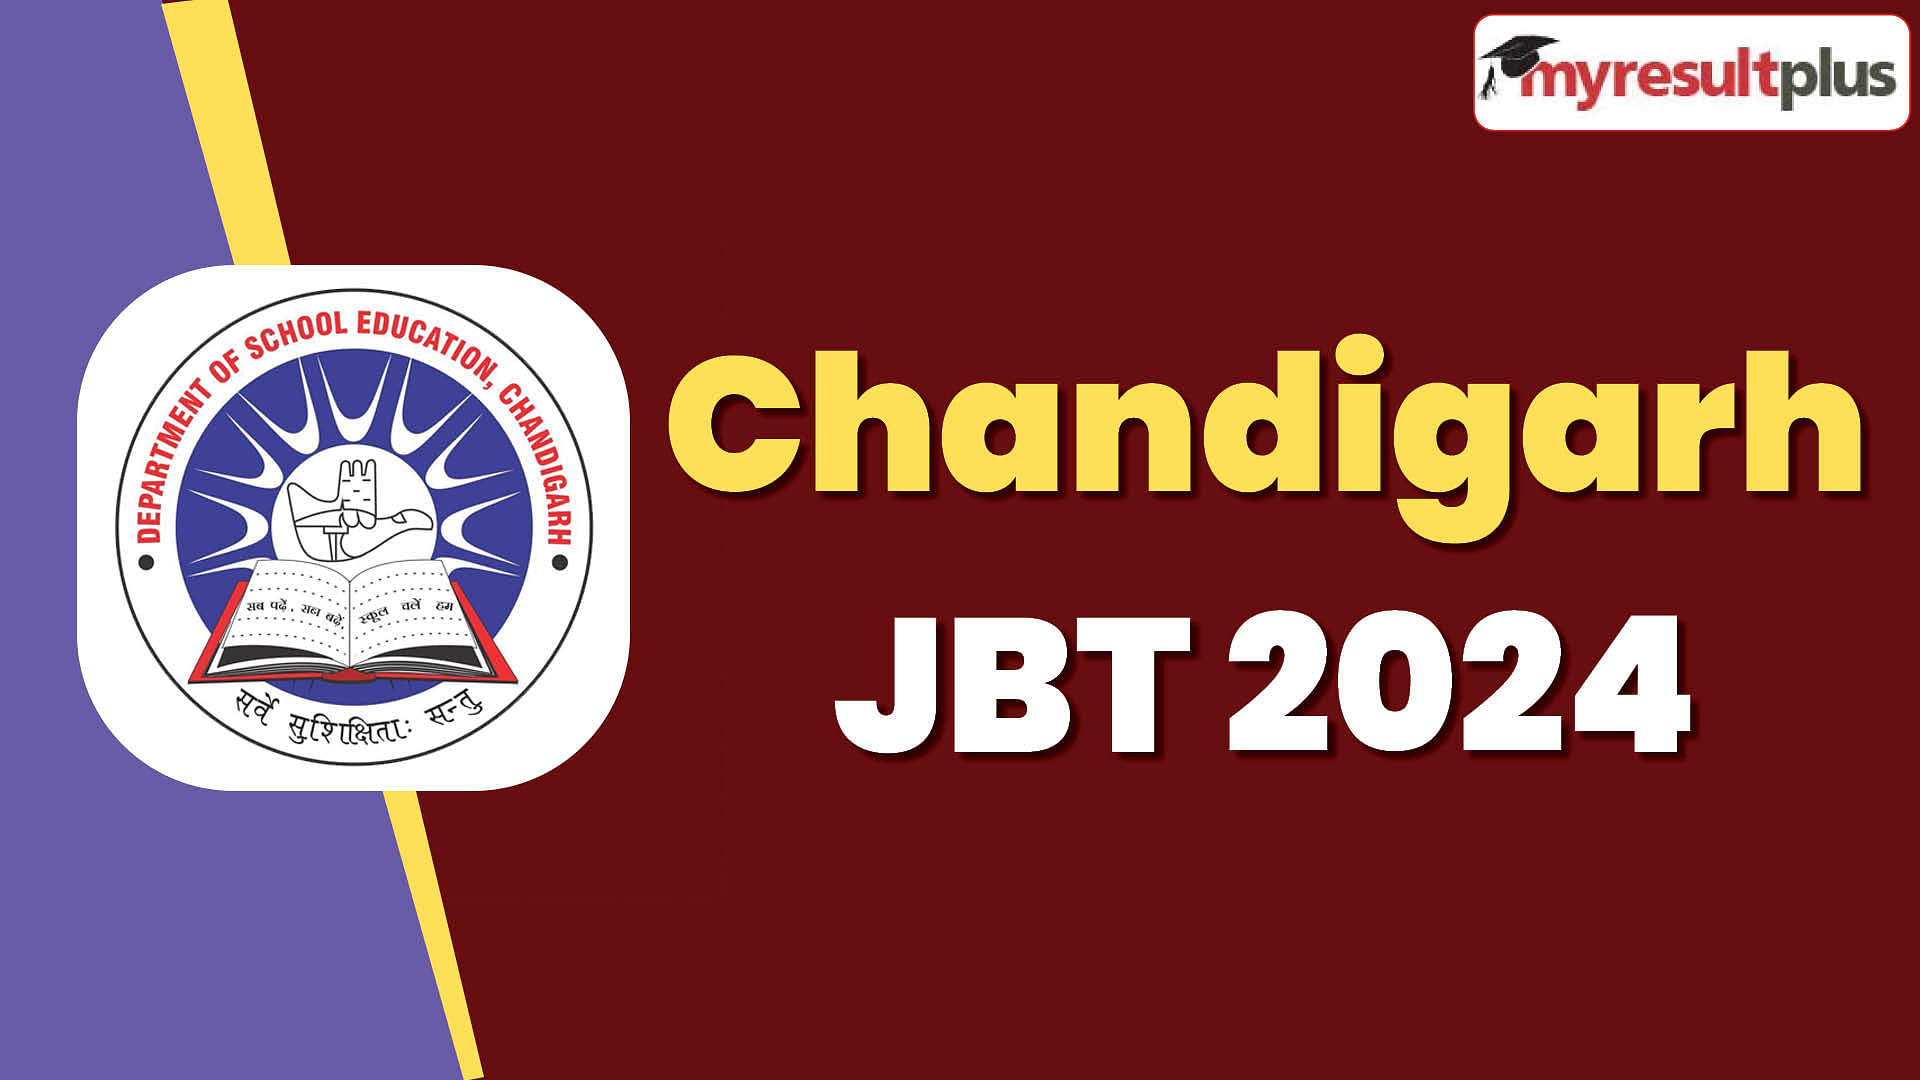 Chandigarh JBT 2024 admit card released, Download today at www.chdeducation.gov.in